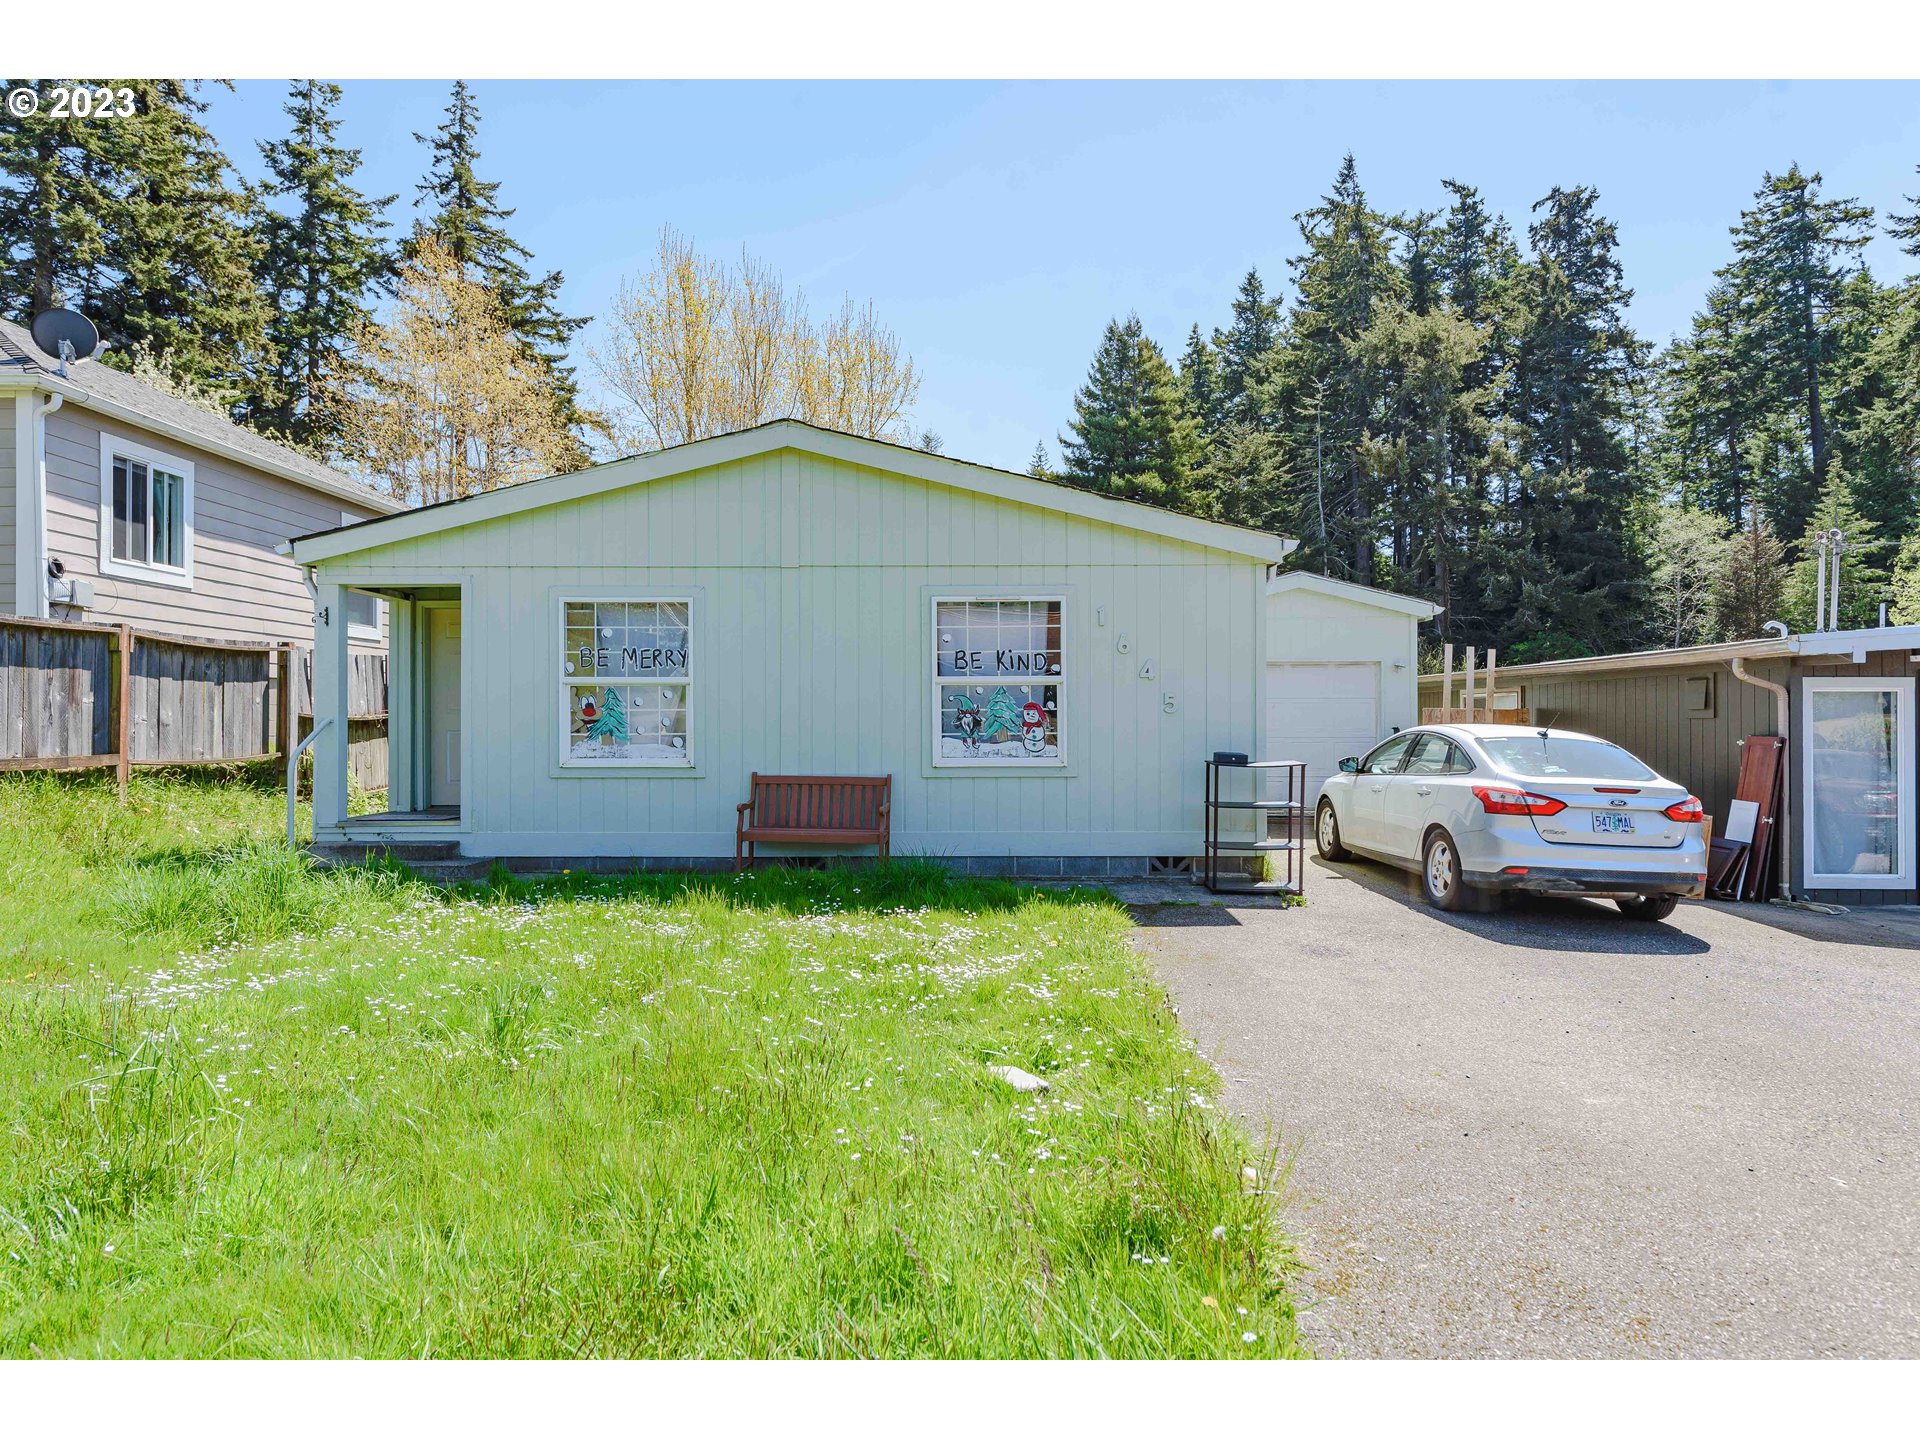 1645 THOMPSON RD, Coos Bay, OR 97420